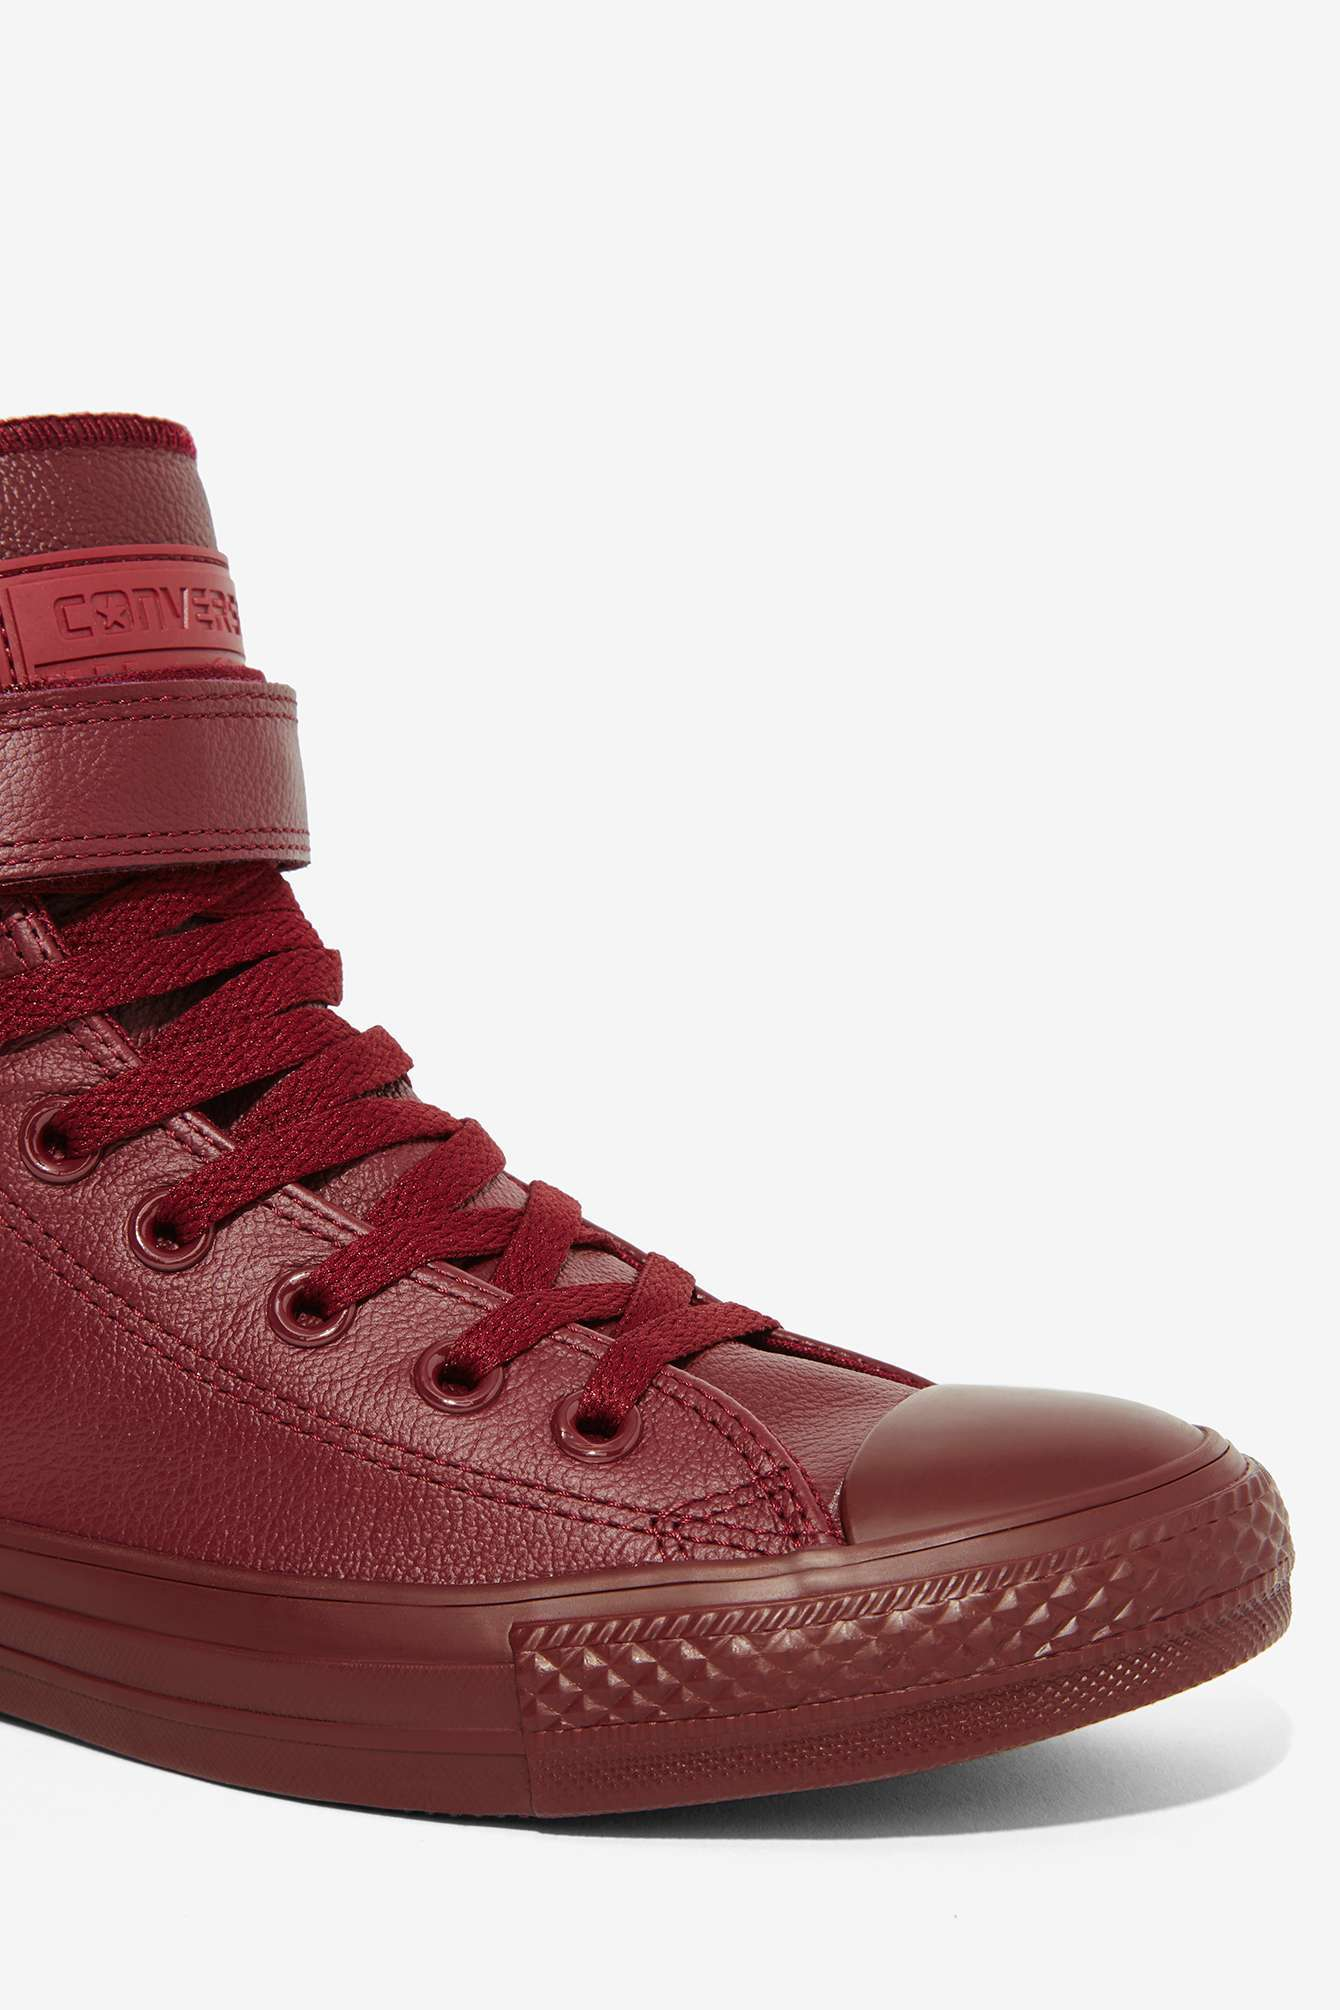 buy \u003e burgundy red converse, Up to 67% OFF